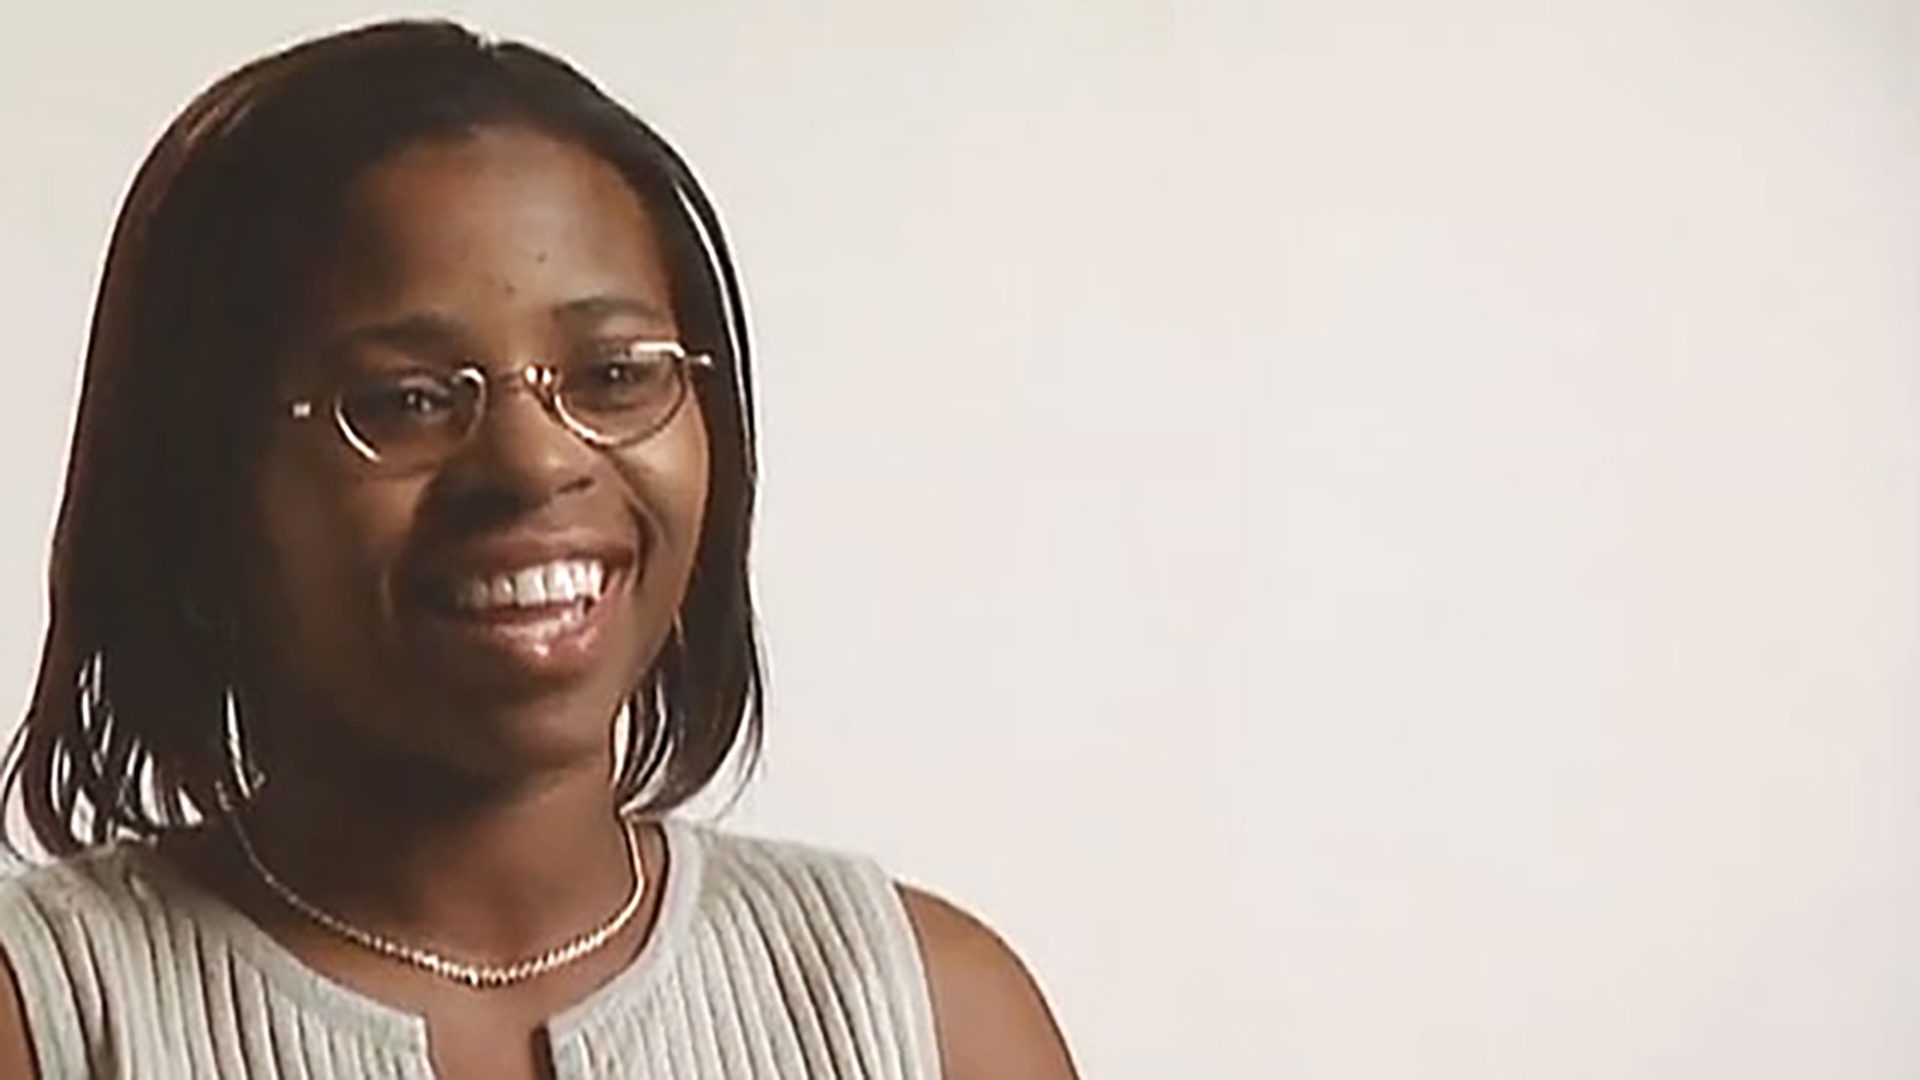 A smiling young woman wearing glasses and a gray sleeveless shirt is interviewed against a white background.